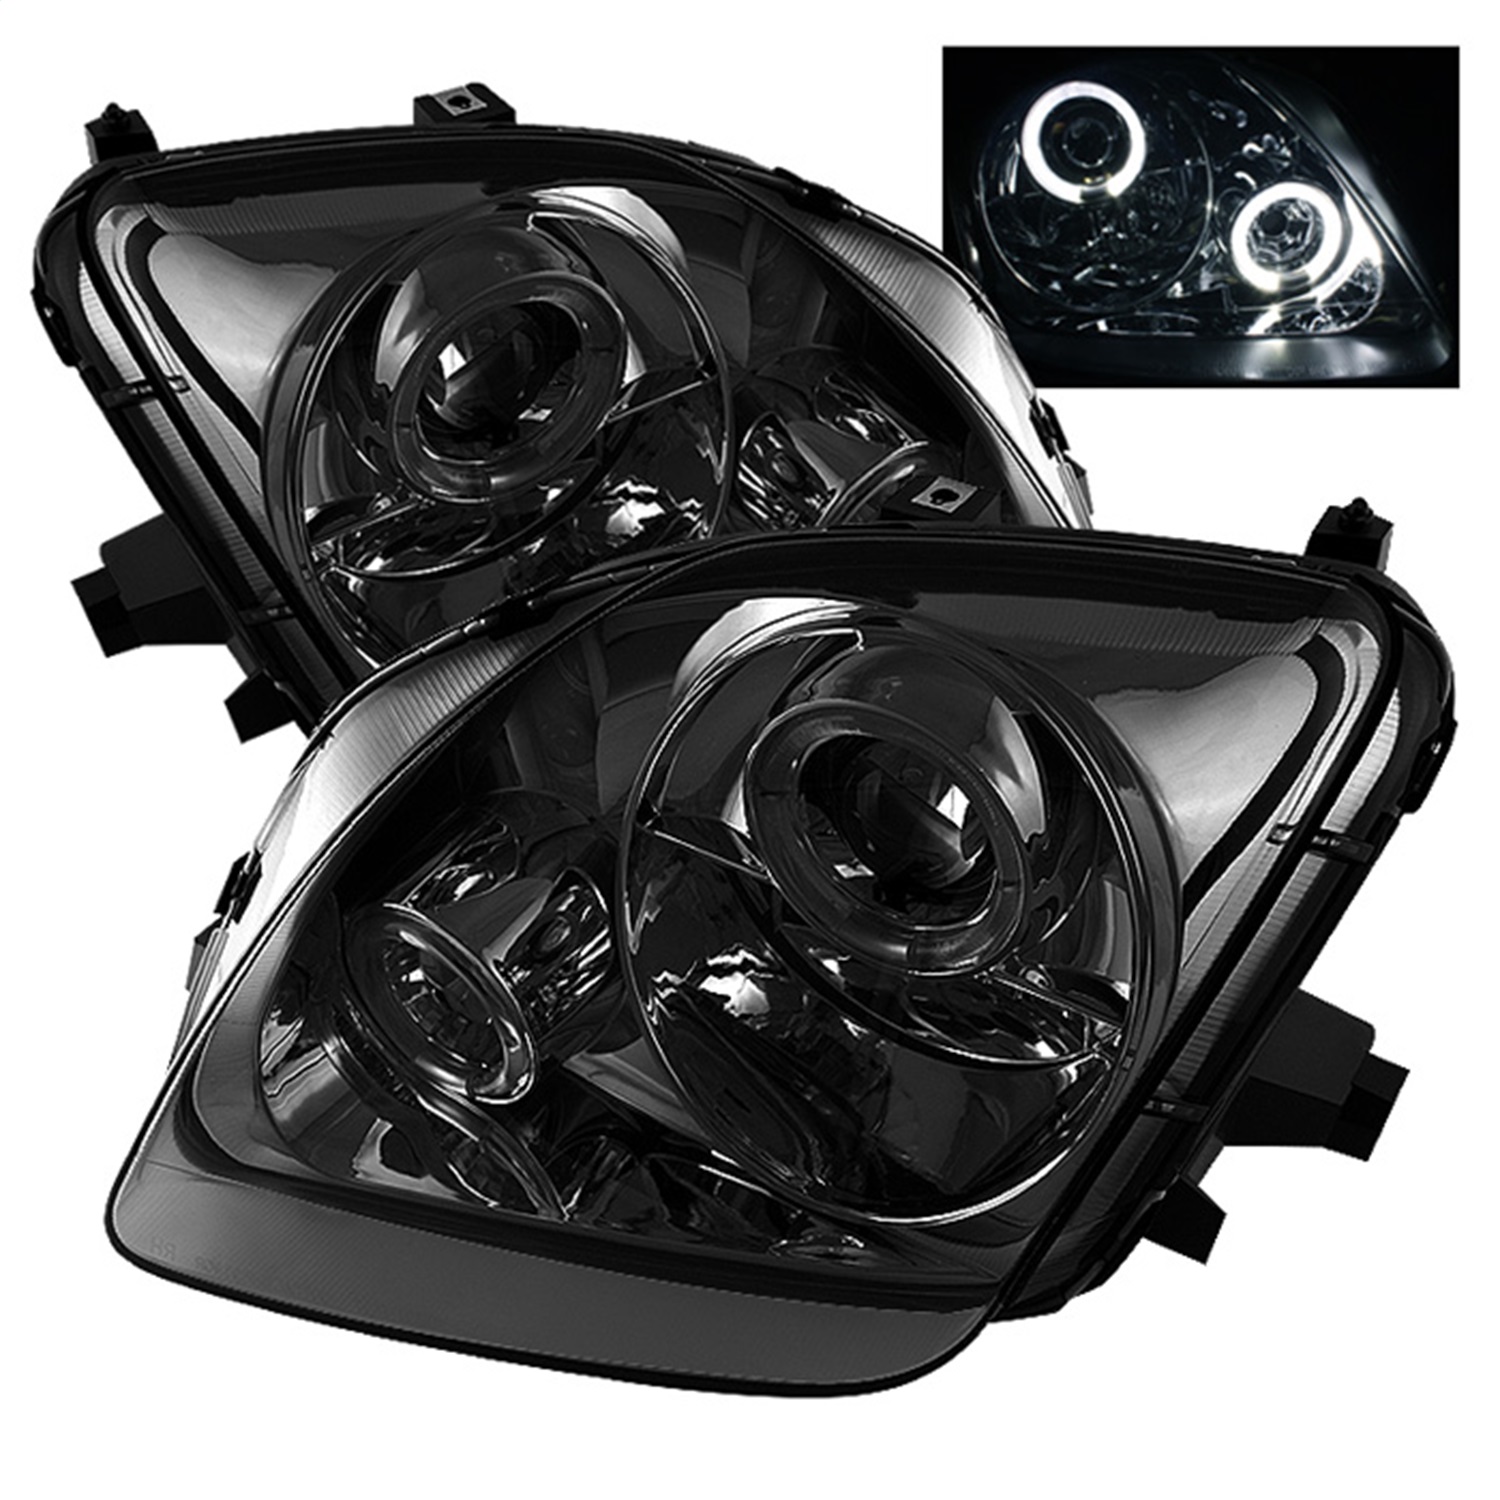 Spyder Auto 5011053 Halo Projector Headlights Fits 97-01 Prelude